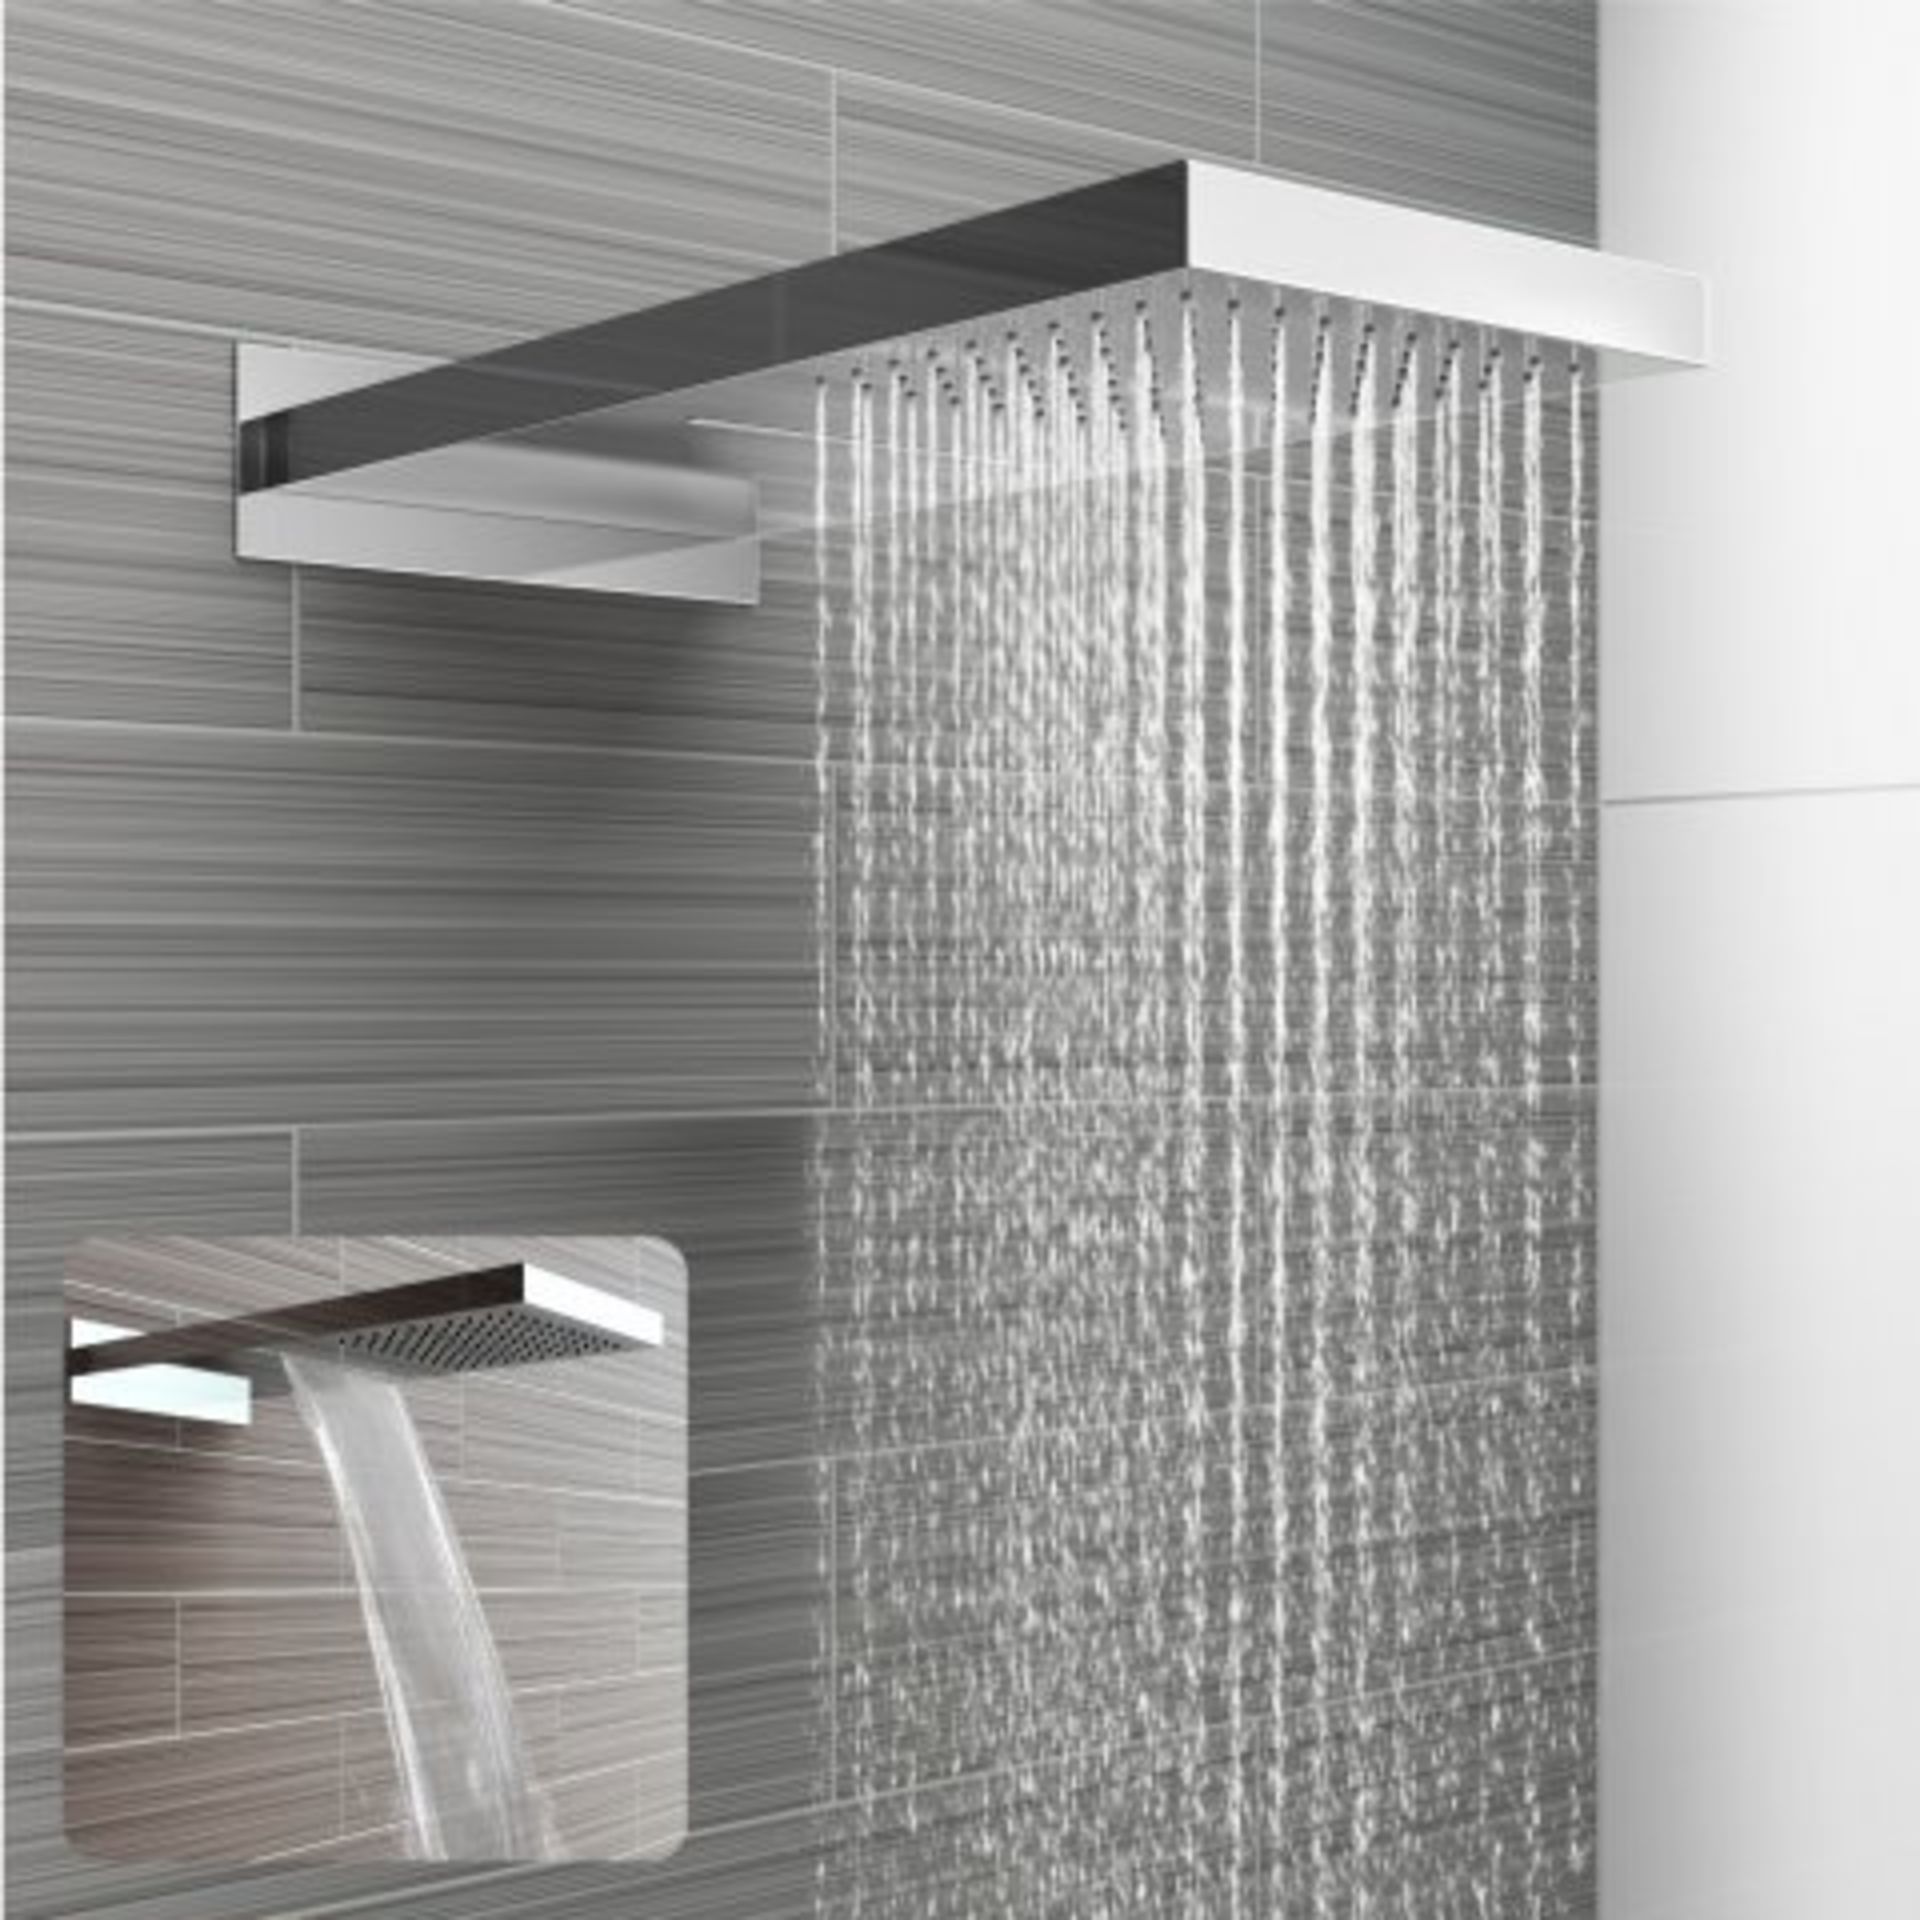 (I22) Stainless Steel 230x500mm Waterfall Shower Head. RRP £374.98. "What An Experience": Enjoy